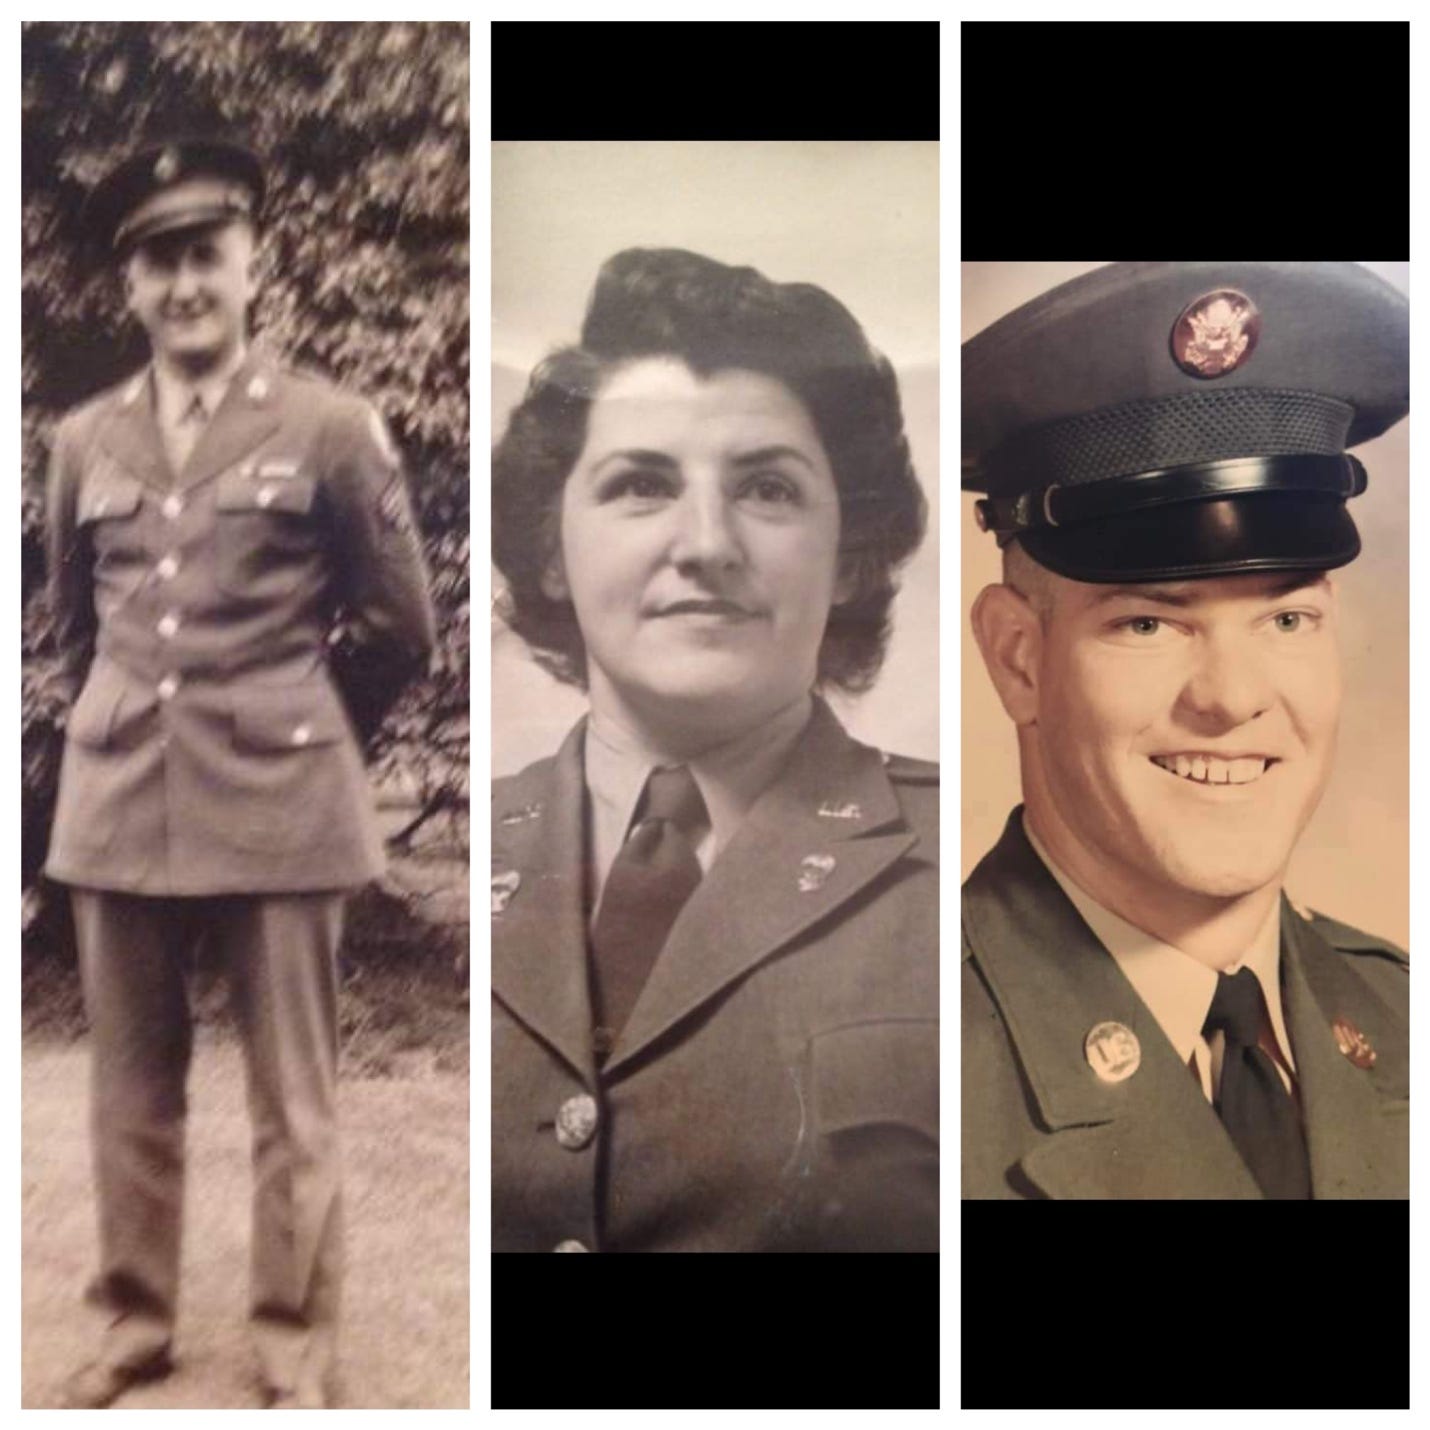 A collage of two people in military uniforms

Description automatically generated